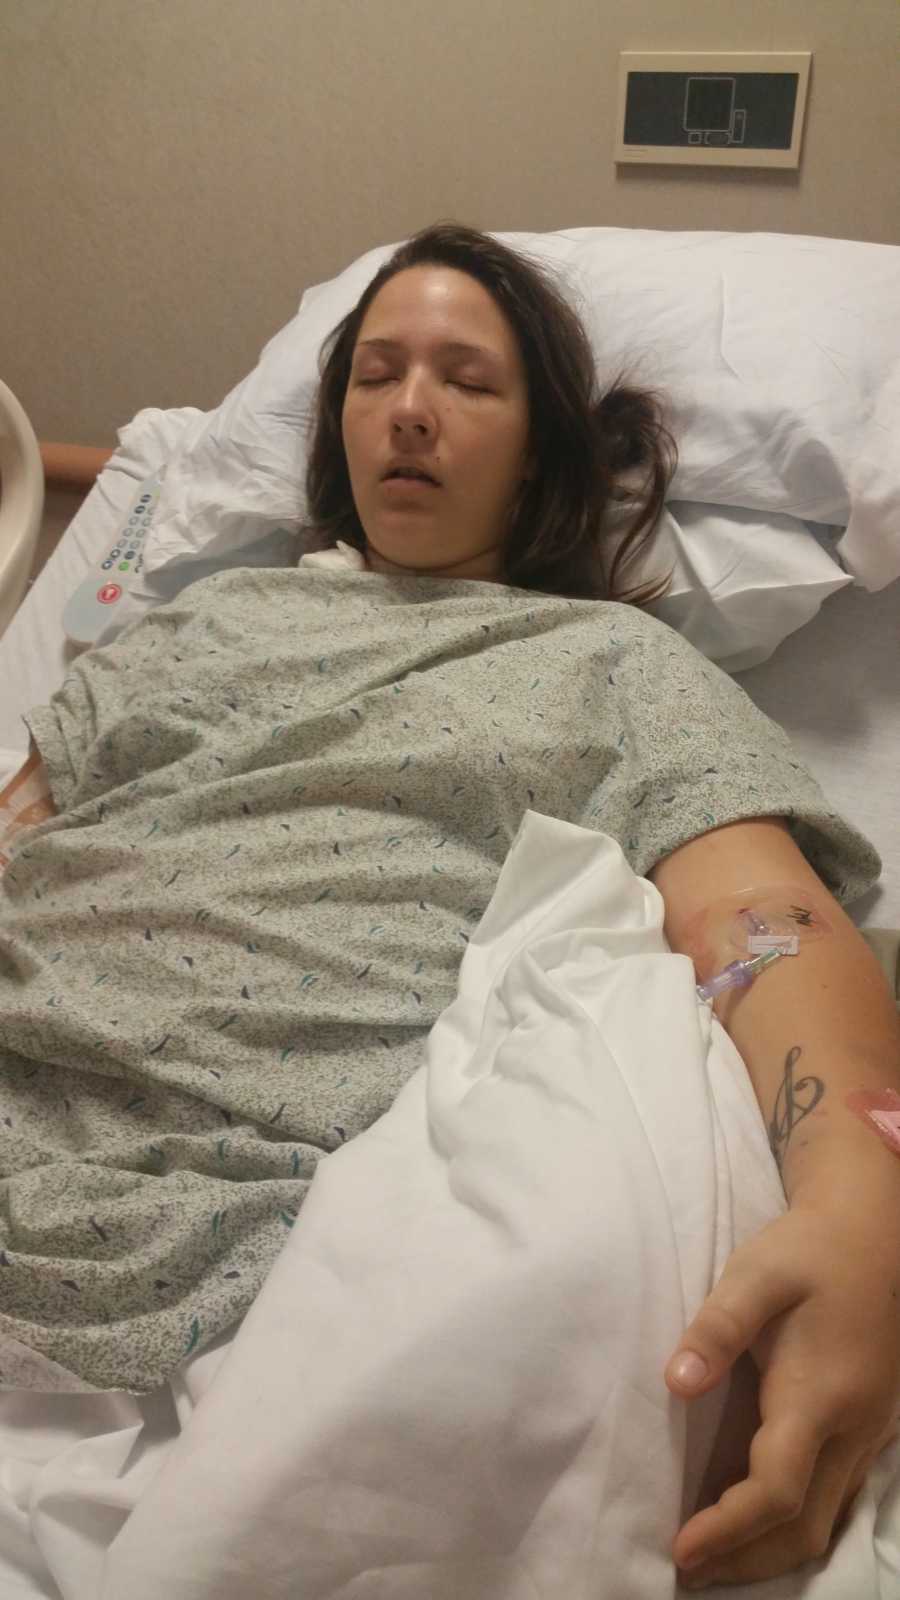 Young woman who overdosed asleep in hospital bed